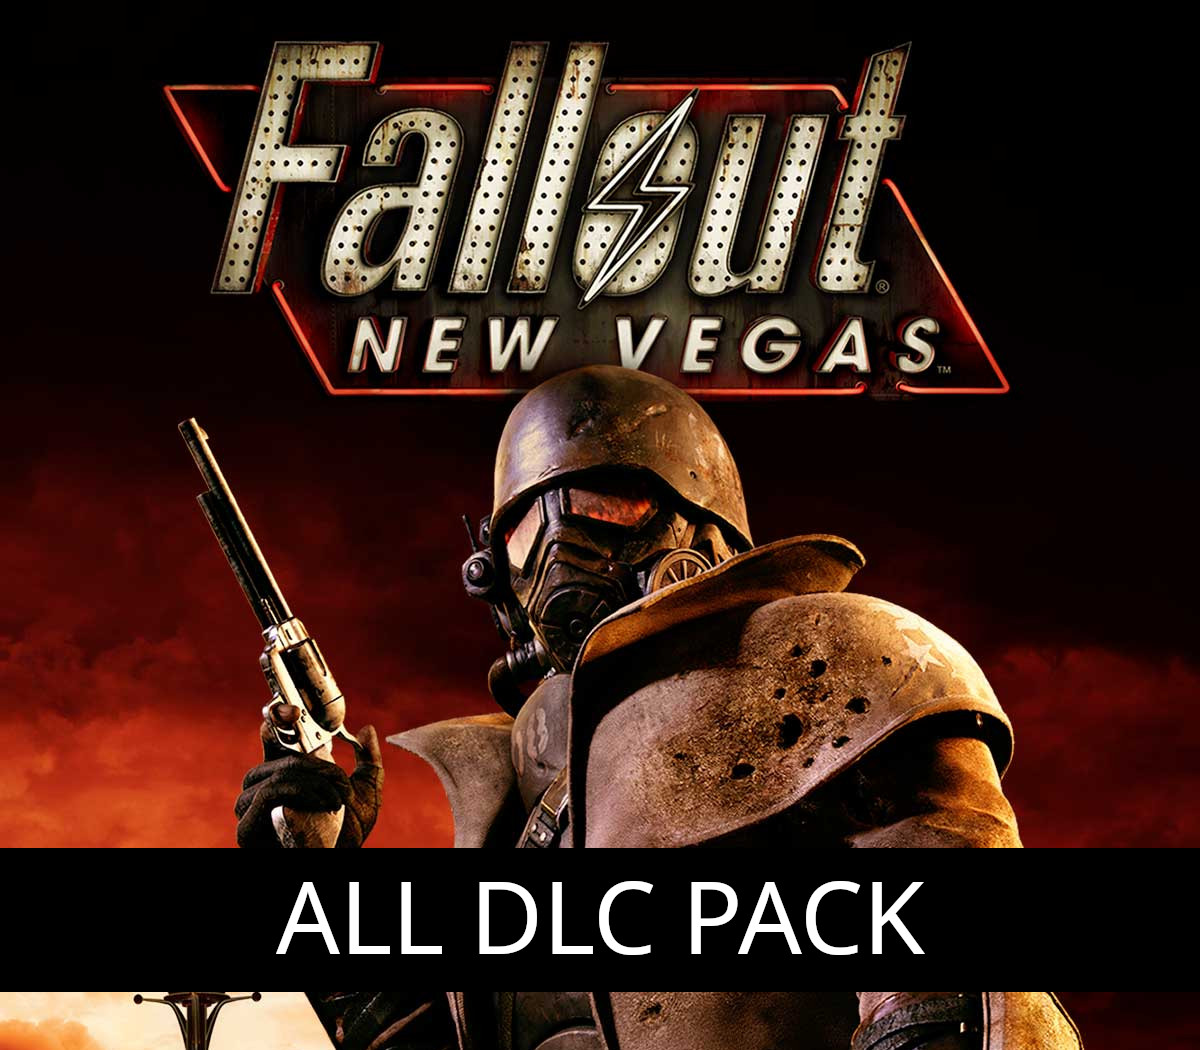 Traducao Fallout New Vegas Old World Blues PT-BR at Fallout New